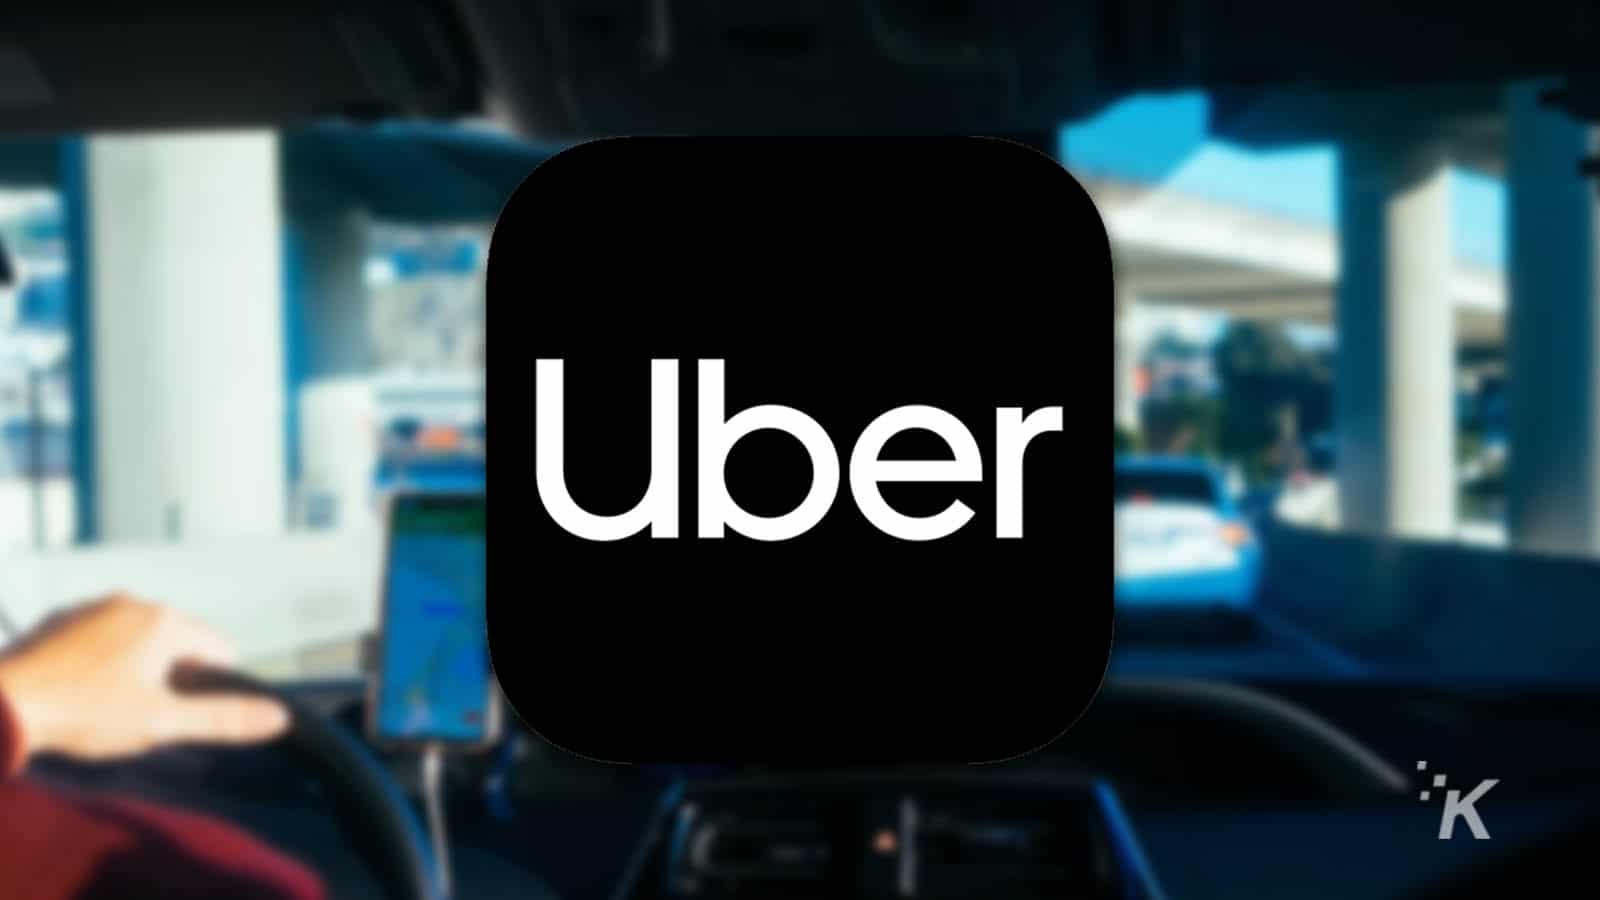 uber logo with blurred background showing driver